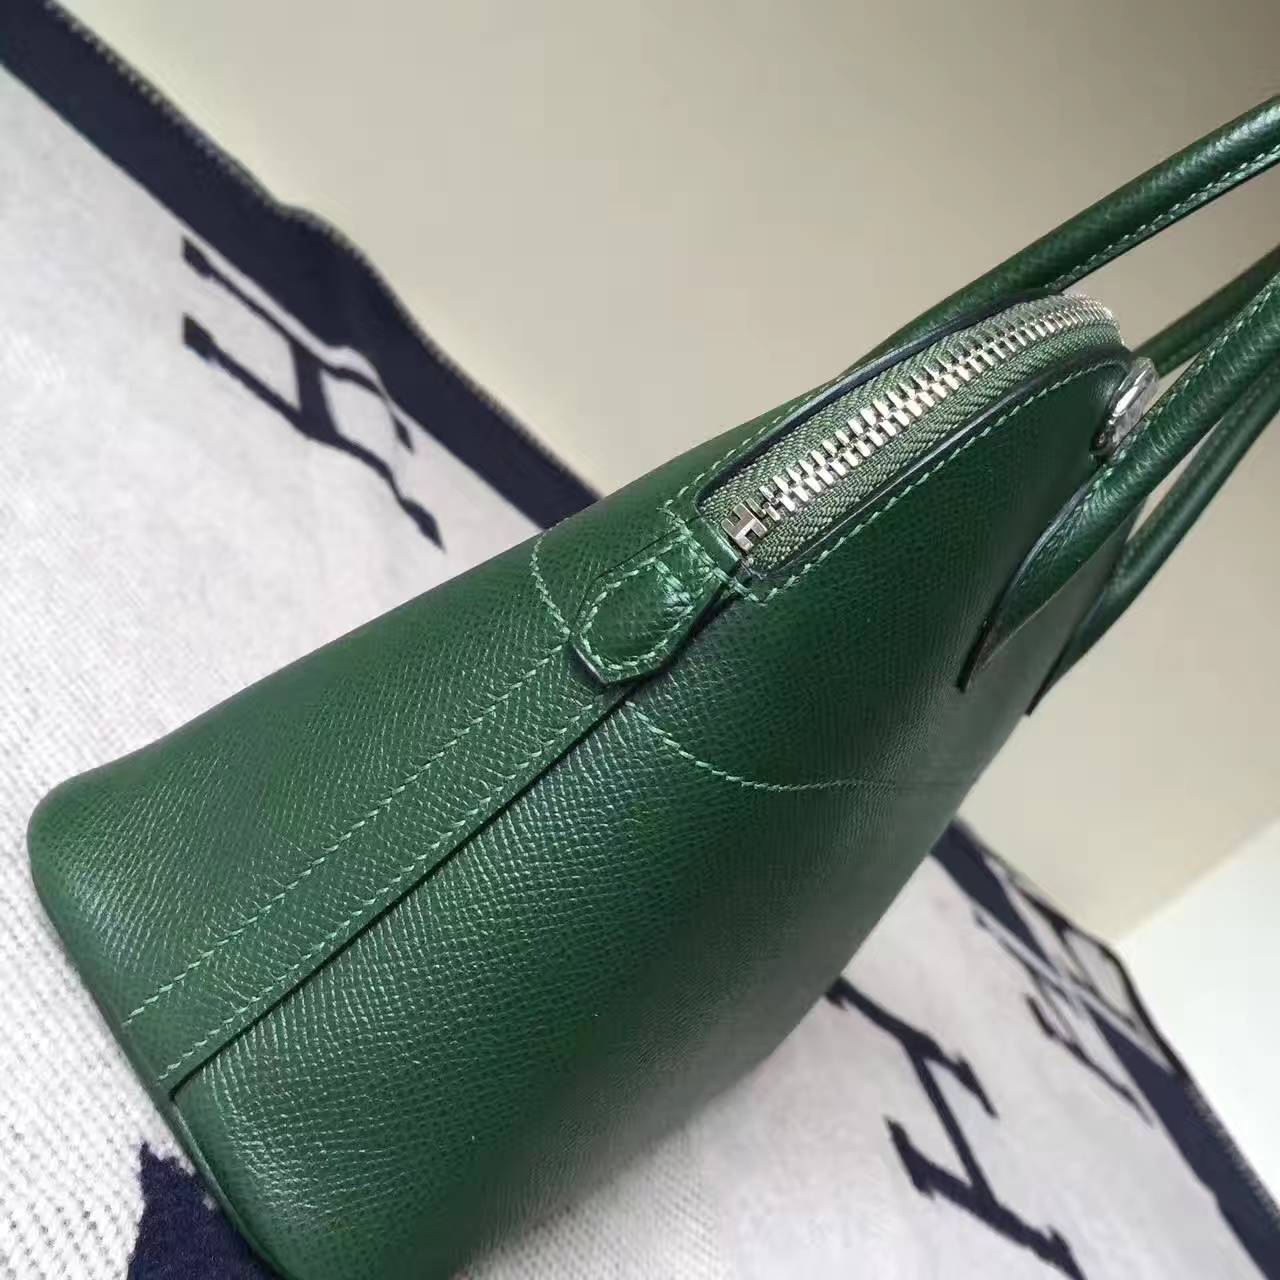 Discount Hermes Bolide Bag 27cm in 2Q English Green Epsom Leather